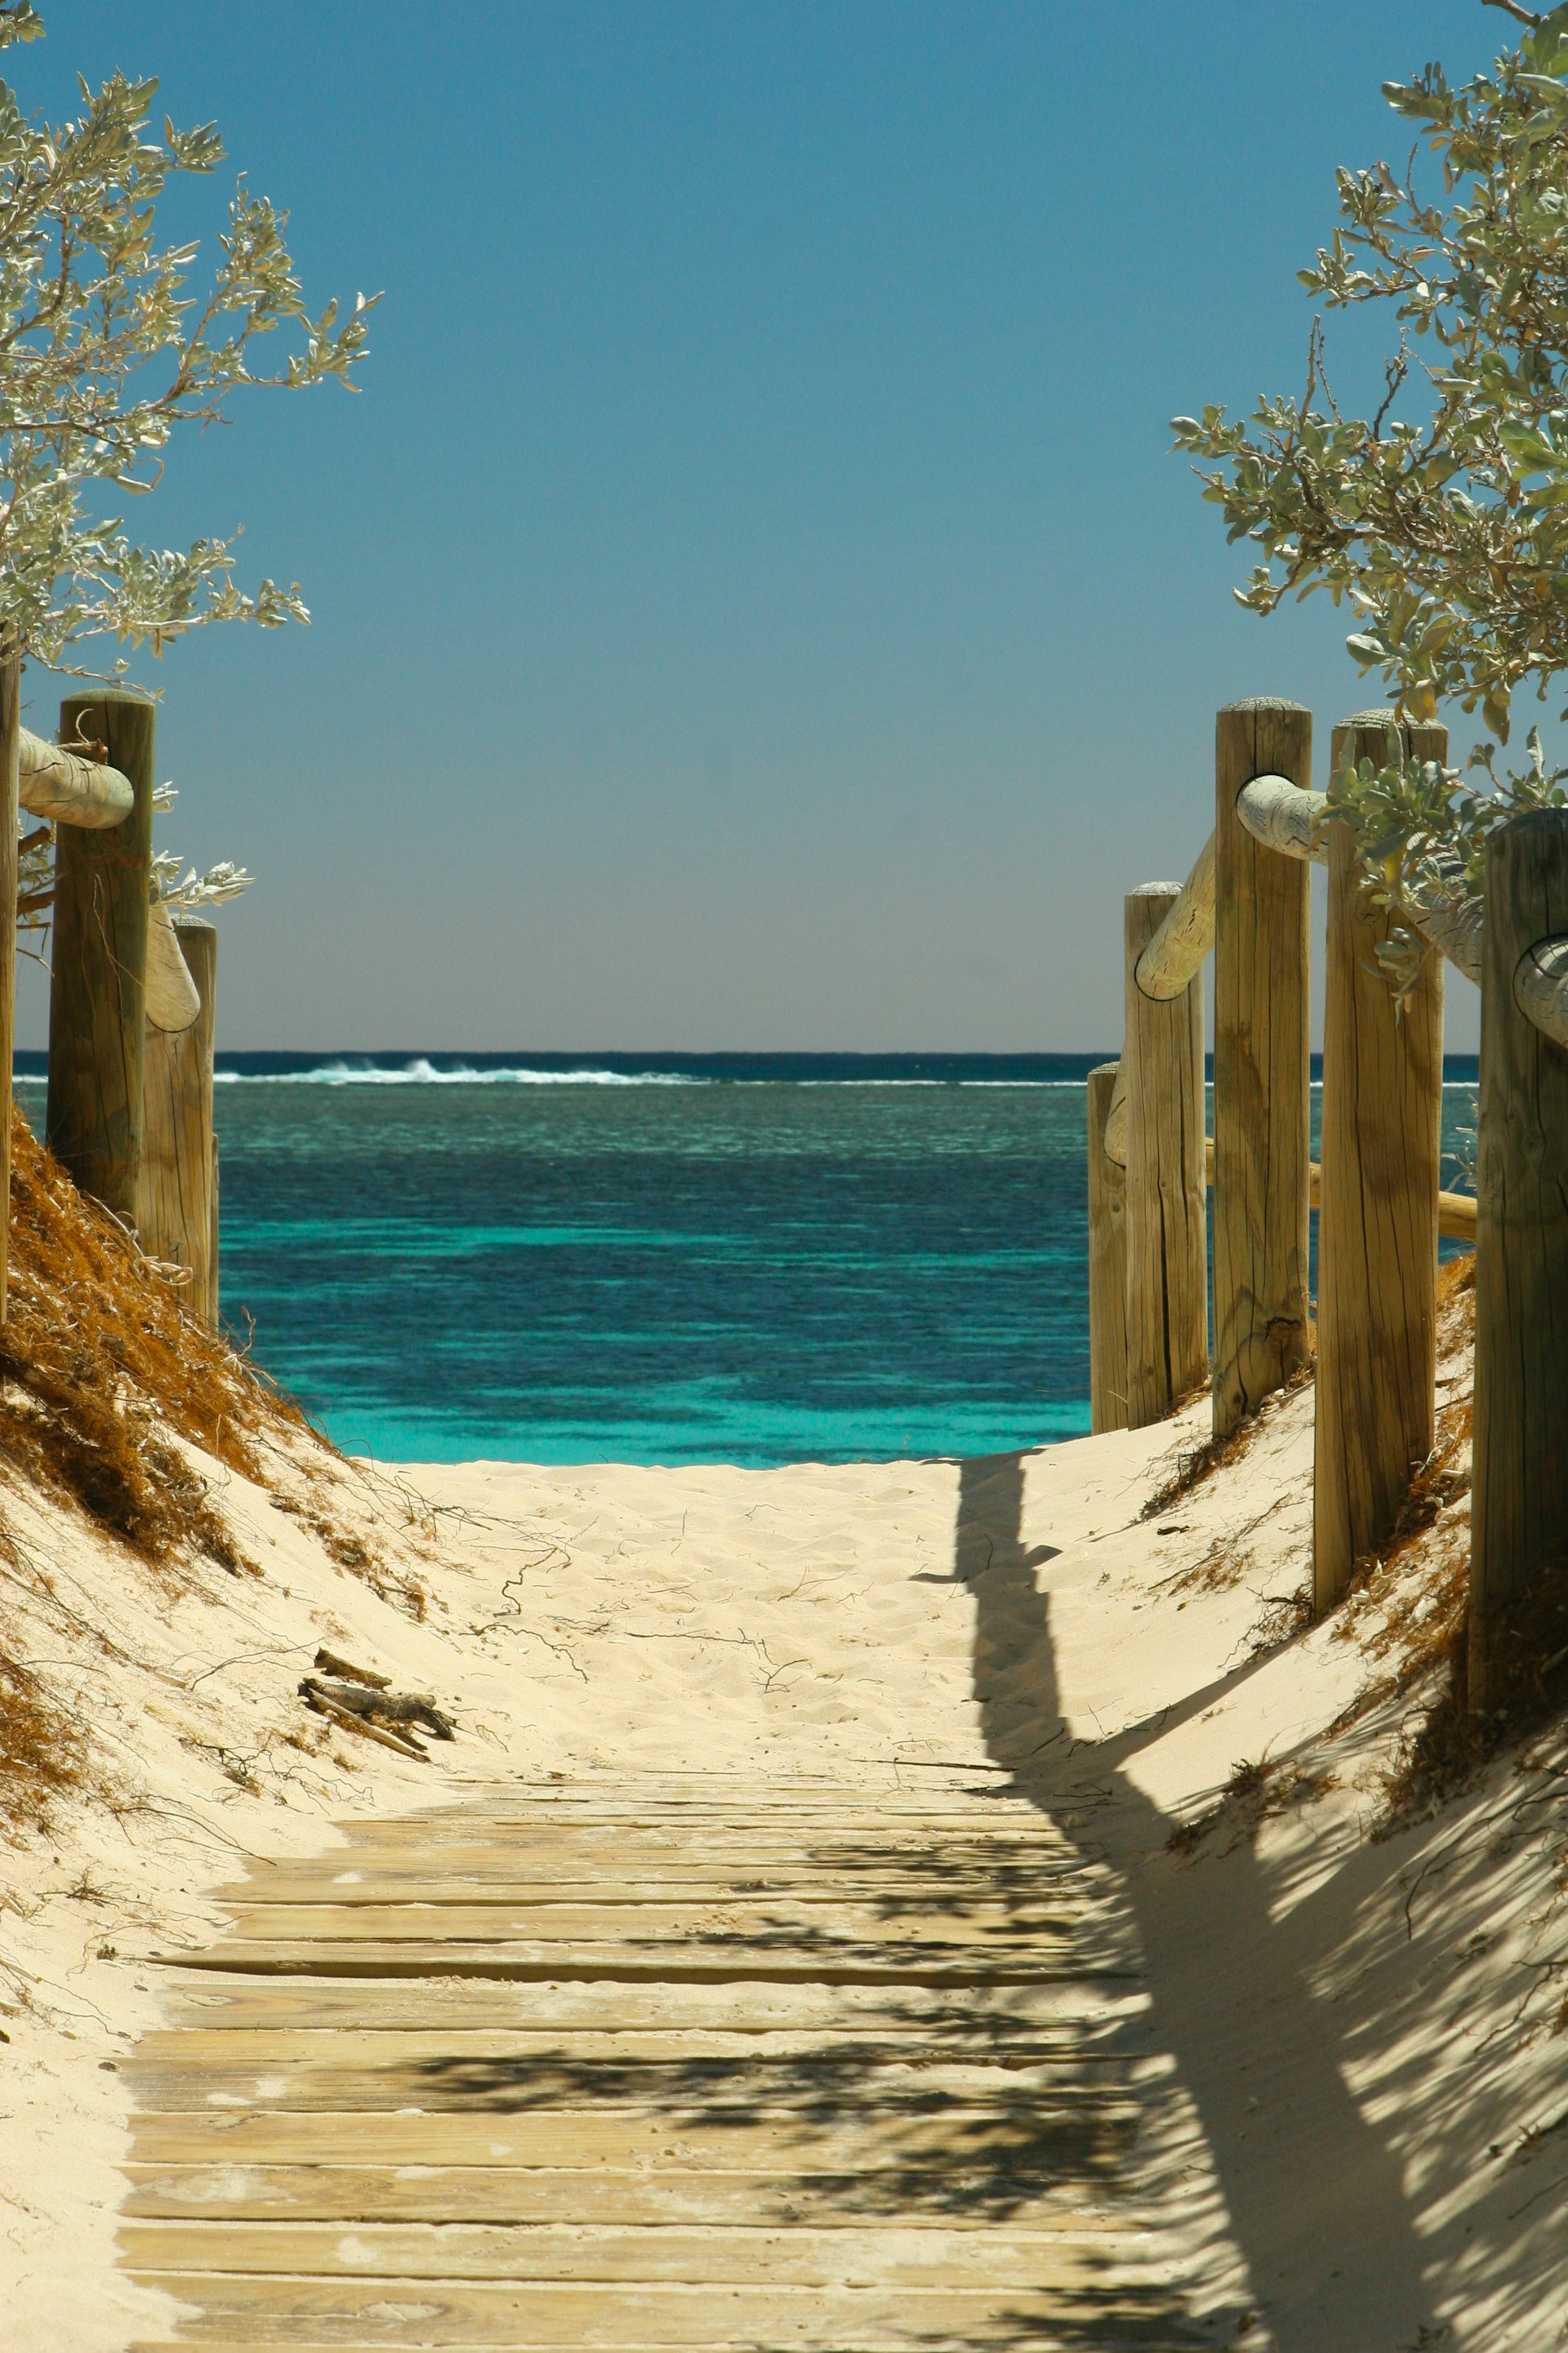 A pathway to the beach | Source: Unsplash